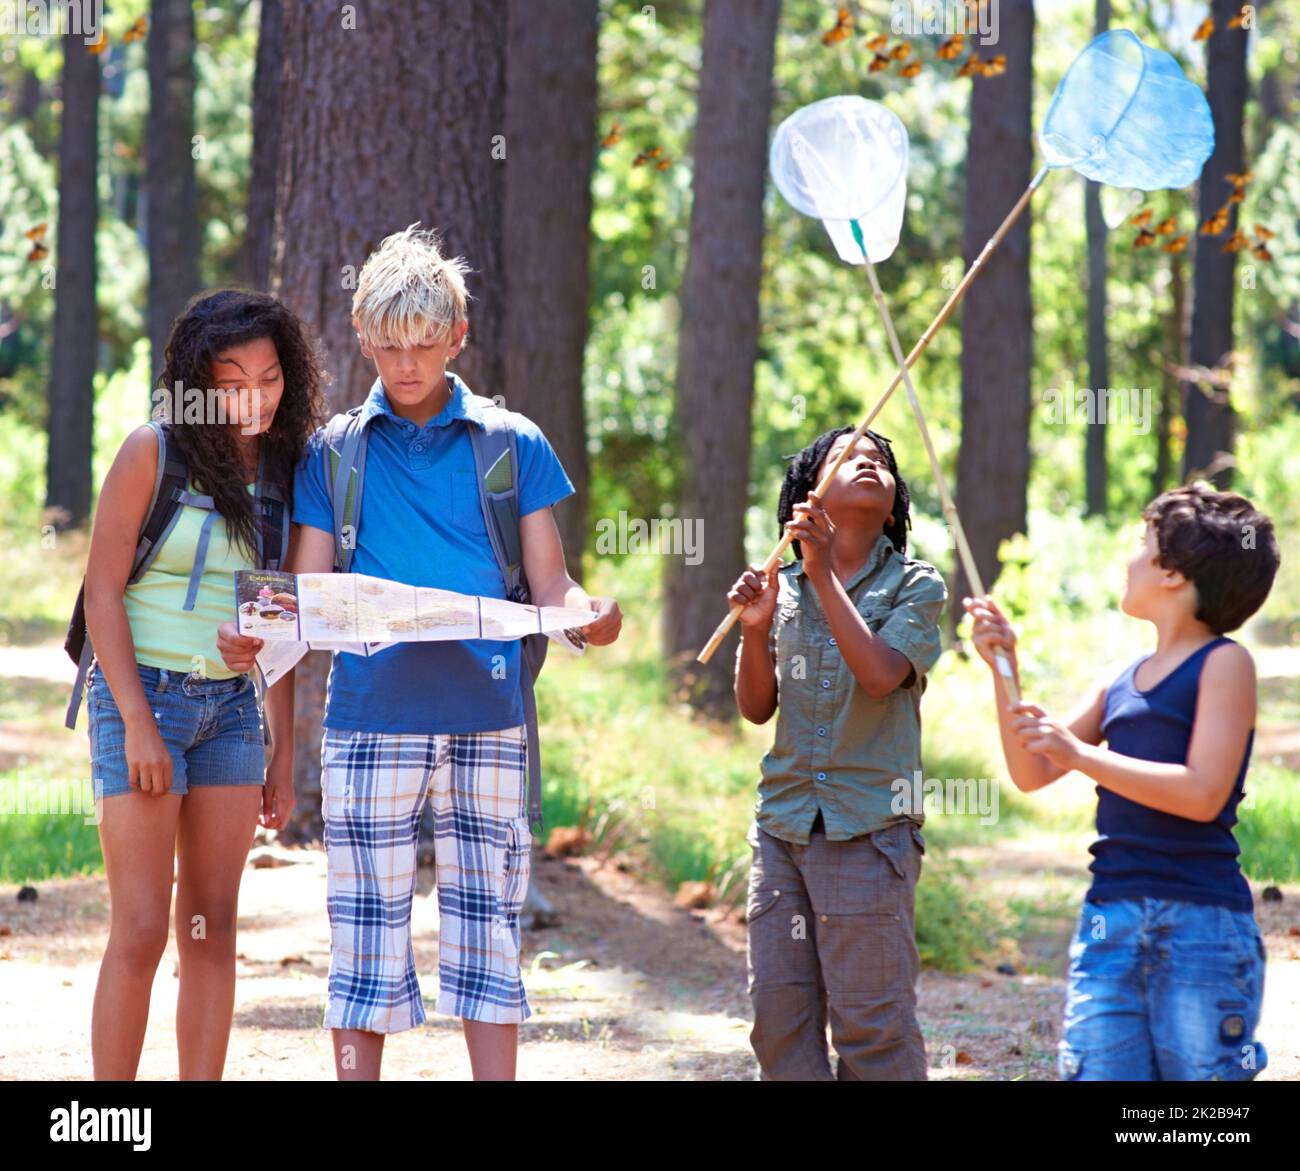 An outdoor experience. Multi-ethnic kids exploring a map while standing outside in a forest. Stock Photo